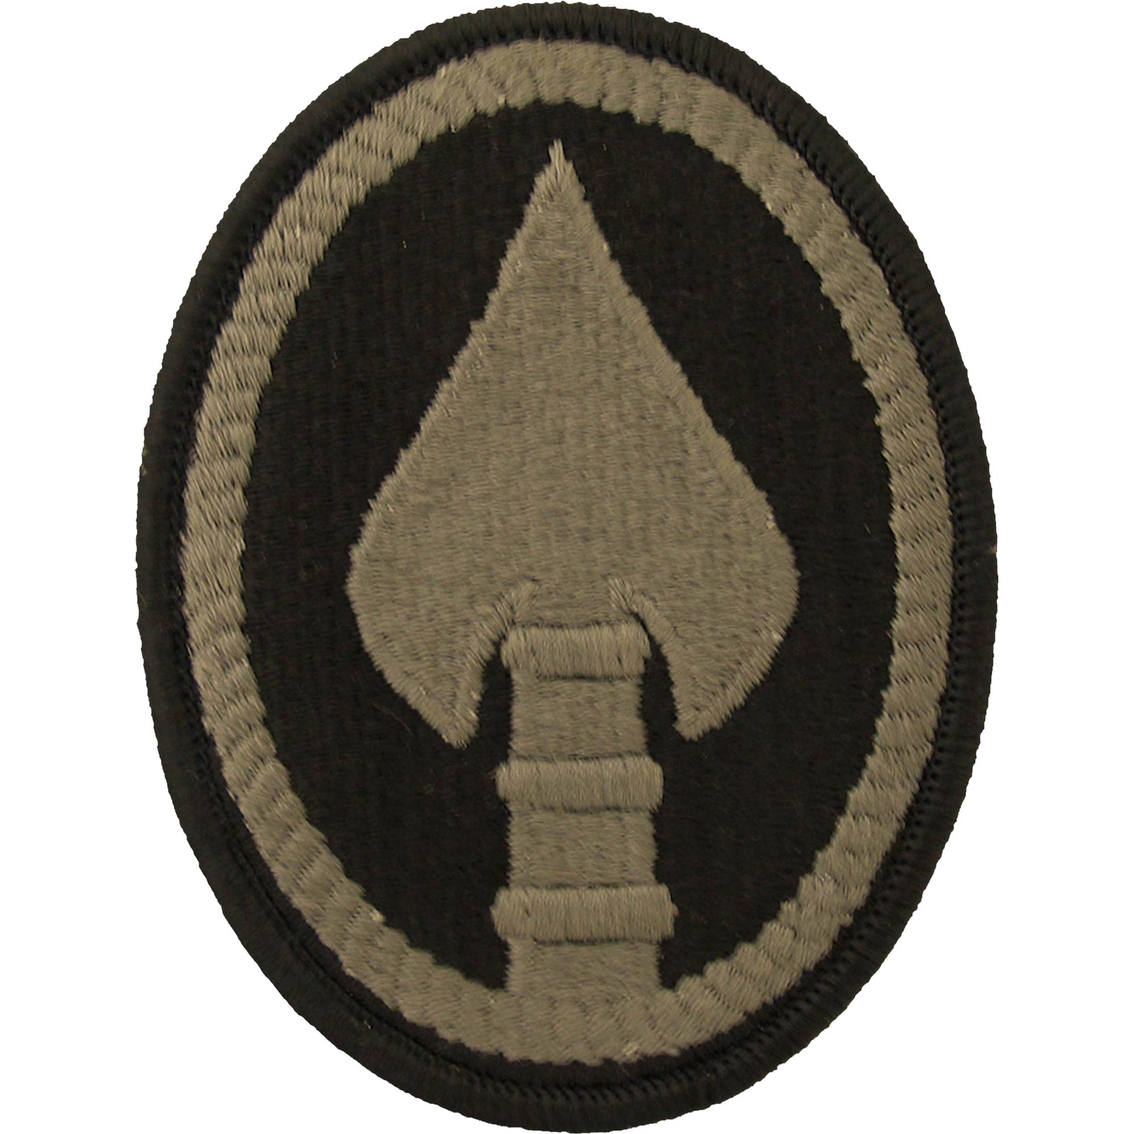 Us Army Special Forces Unit Patches - Army Military